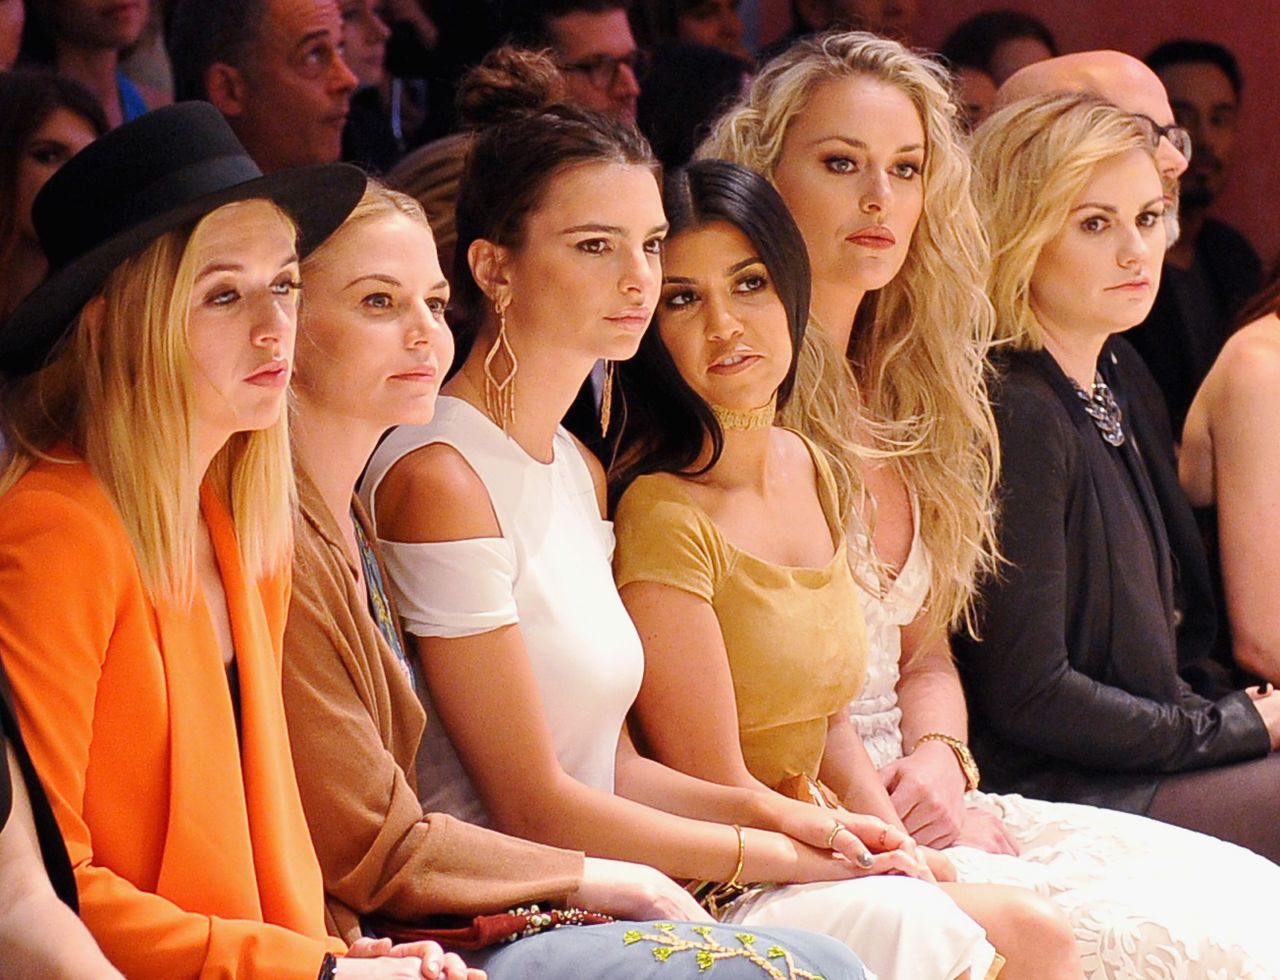 Vonn, second from right, attends a Hollywood fashion show with other celebrities, including Emily Ratajkowski, Kourtney Kardashian and Anna Paquin, in April 2016.